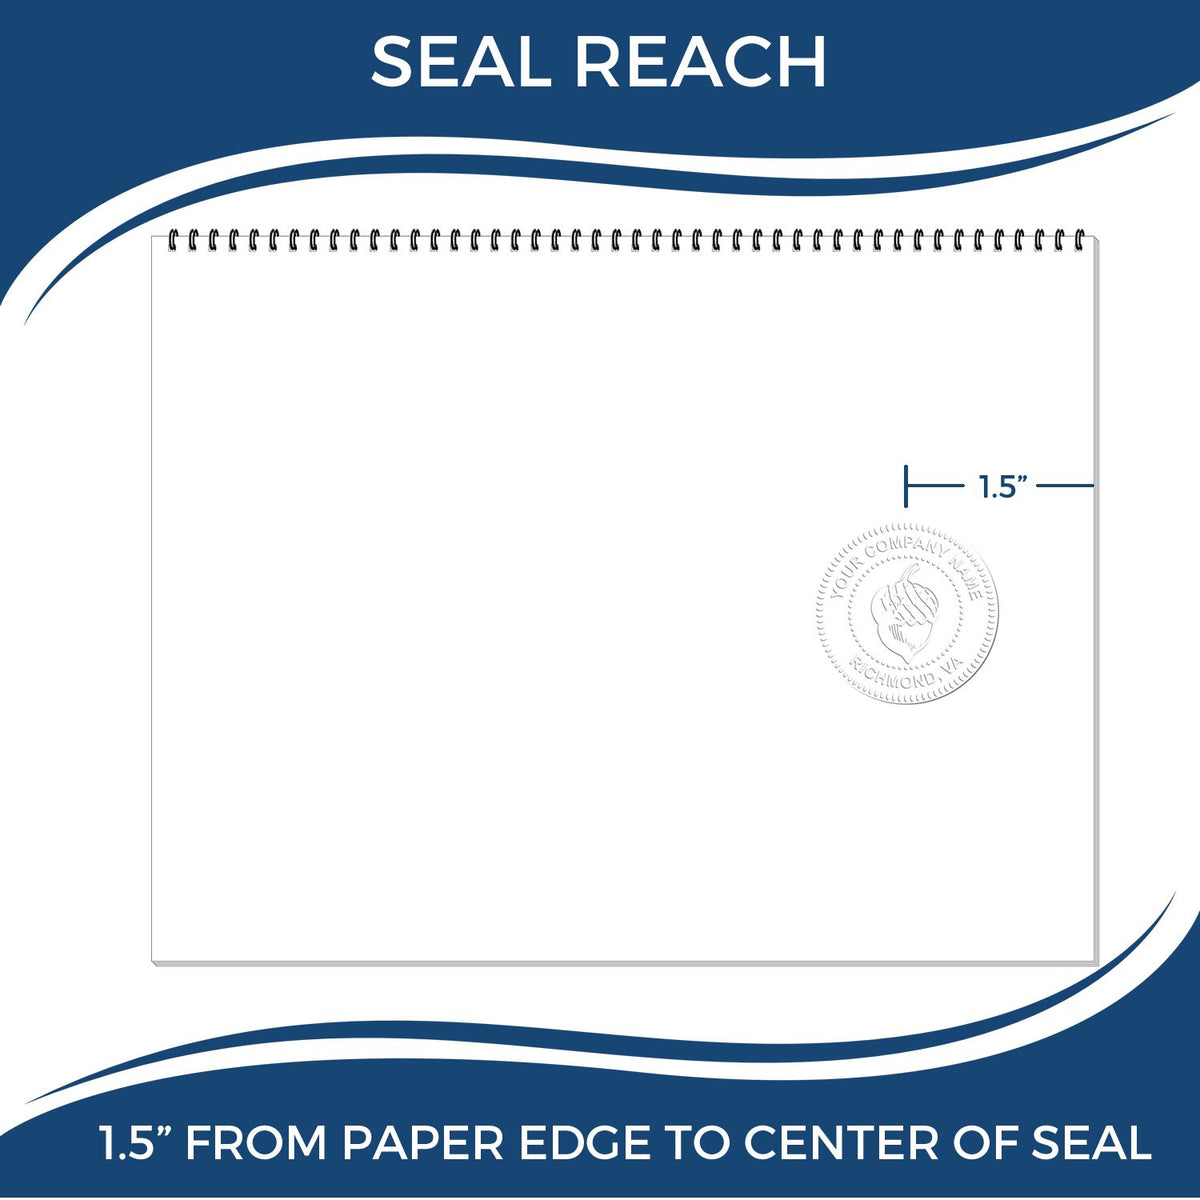 An infographic showing the seal reach which is represented by a ruler and a miniature seal image of the Handheld Kentucky Land Surveyor Seal